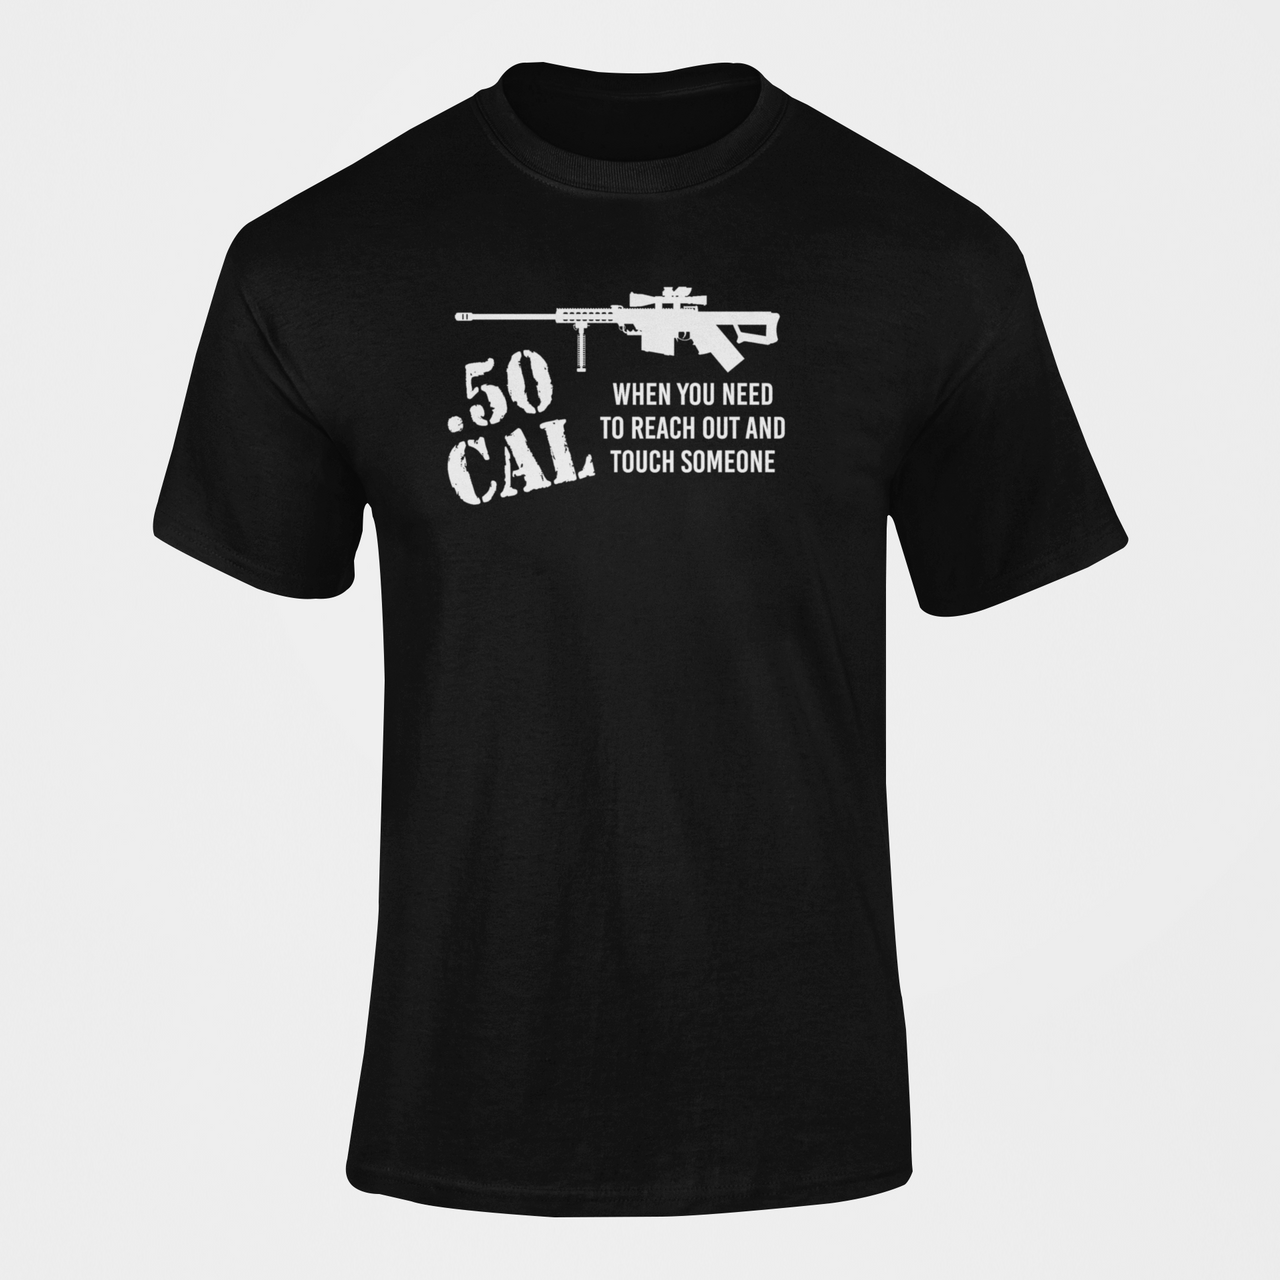 Military T-shirt - 0.50 Cal, When You Need to Reach Out...(Men)